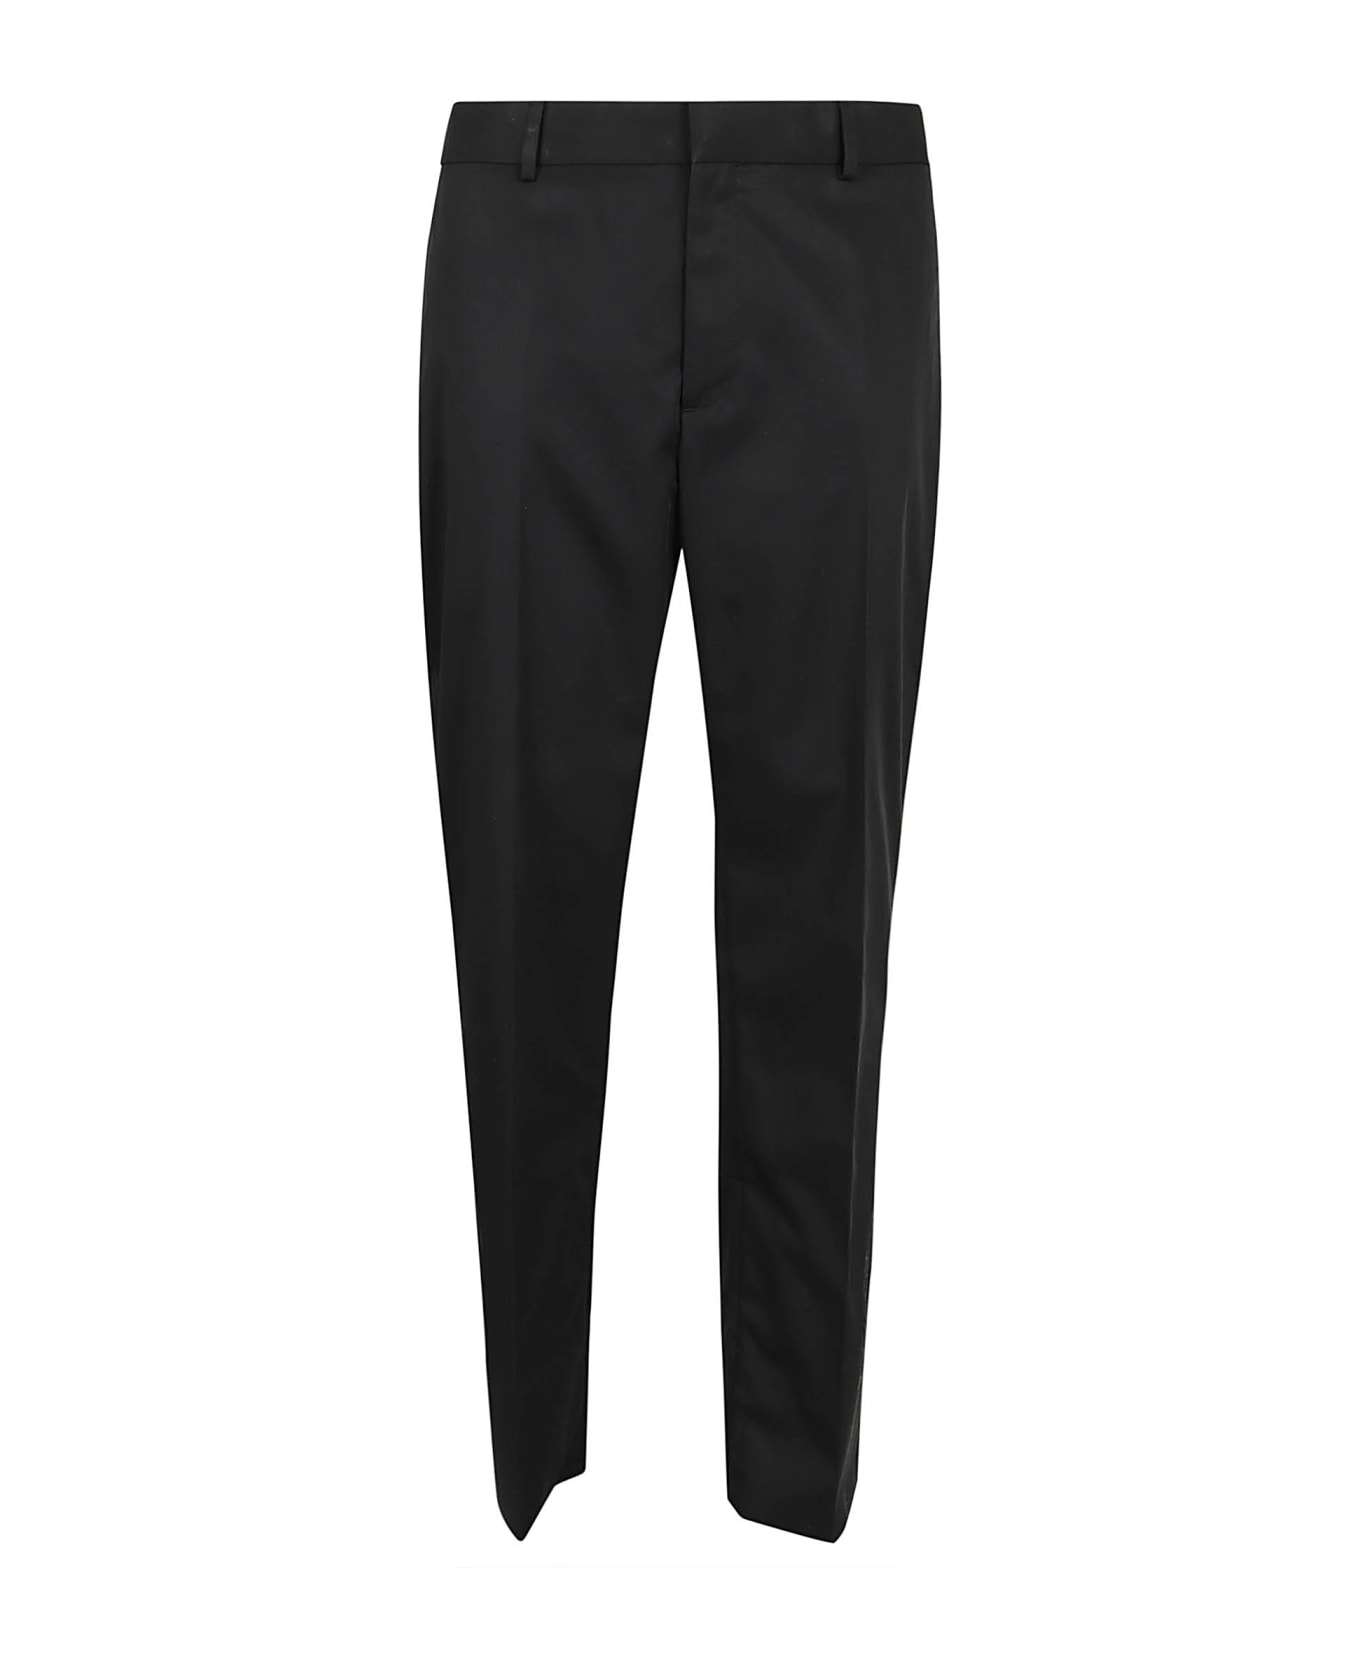 Off-White Slim Fit Trousers - Black Black ボトムス